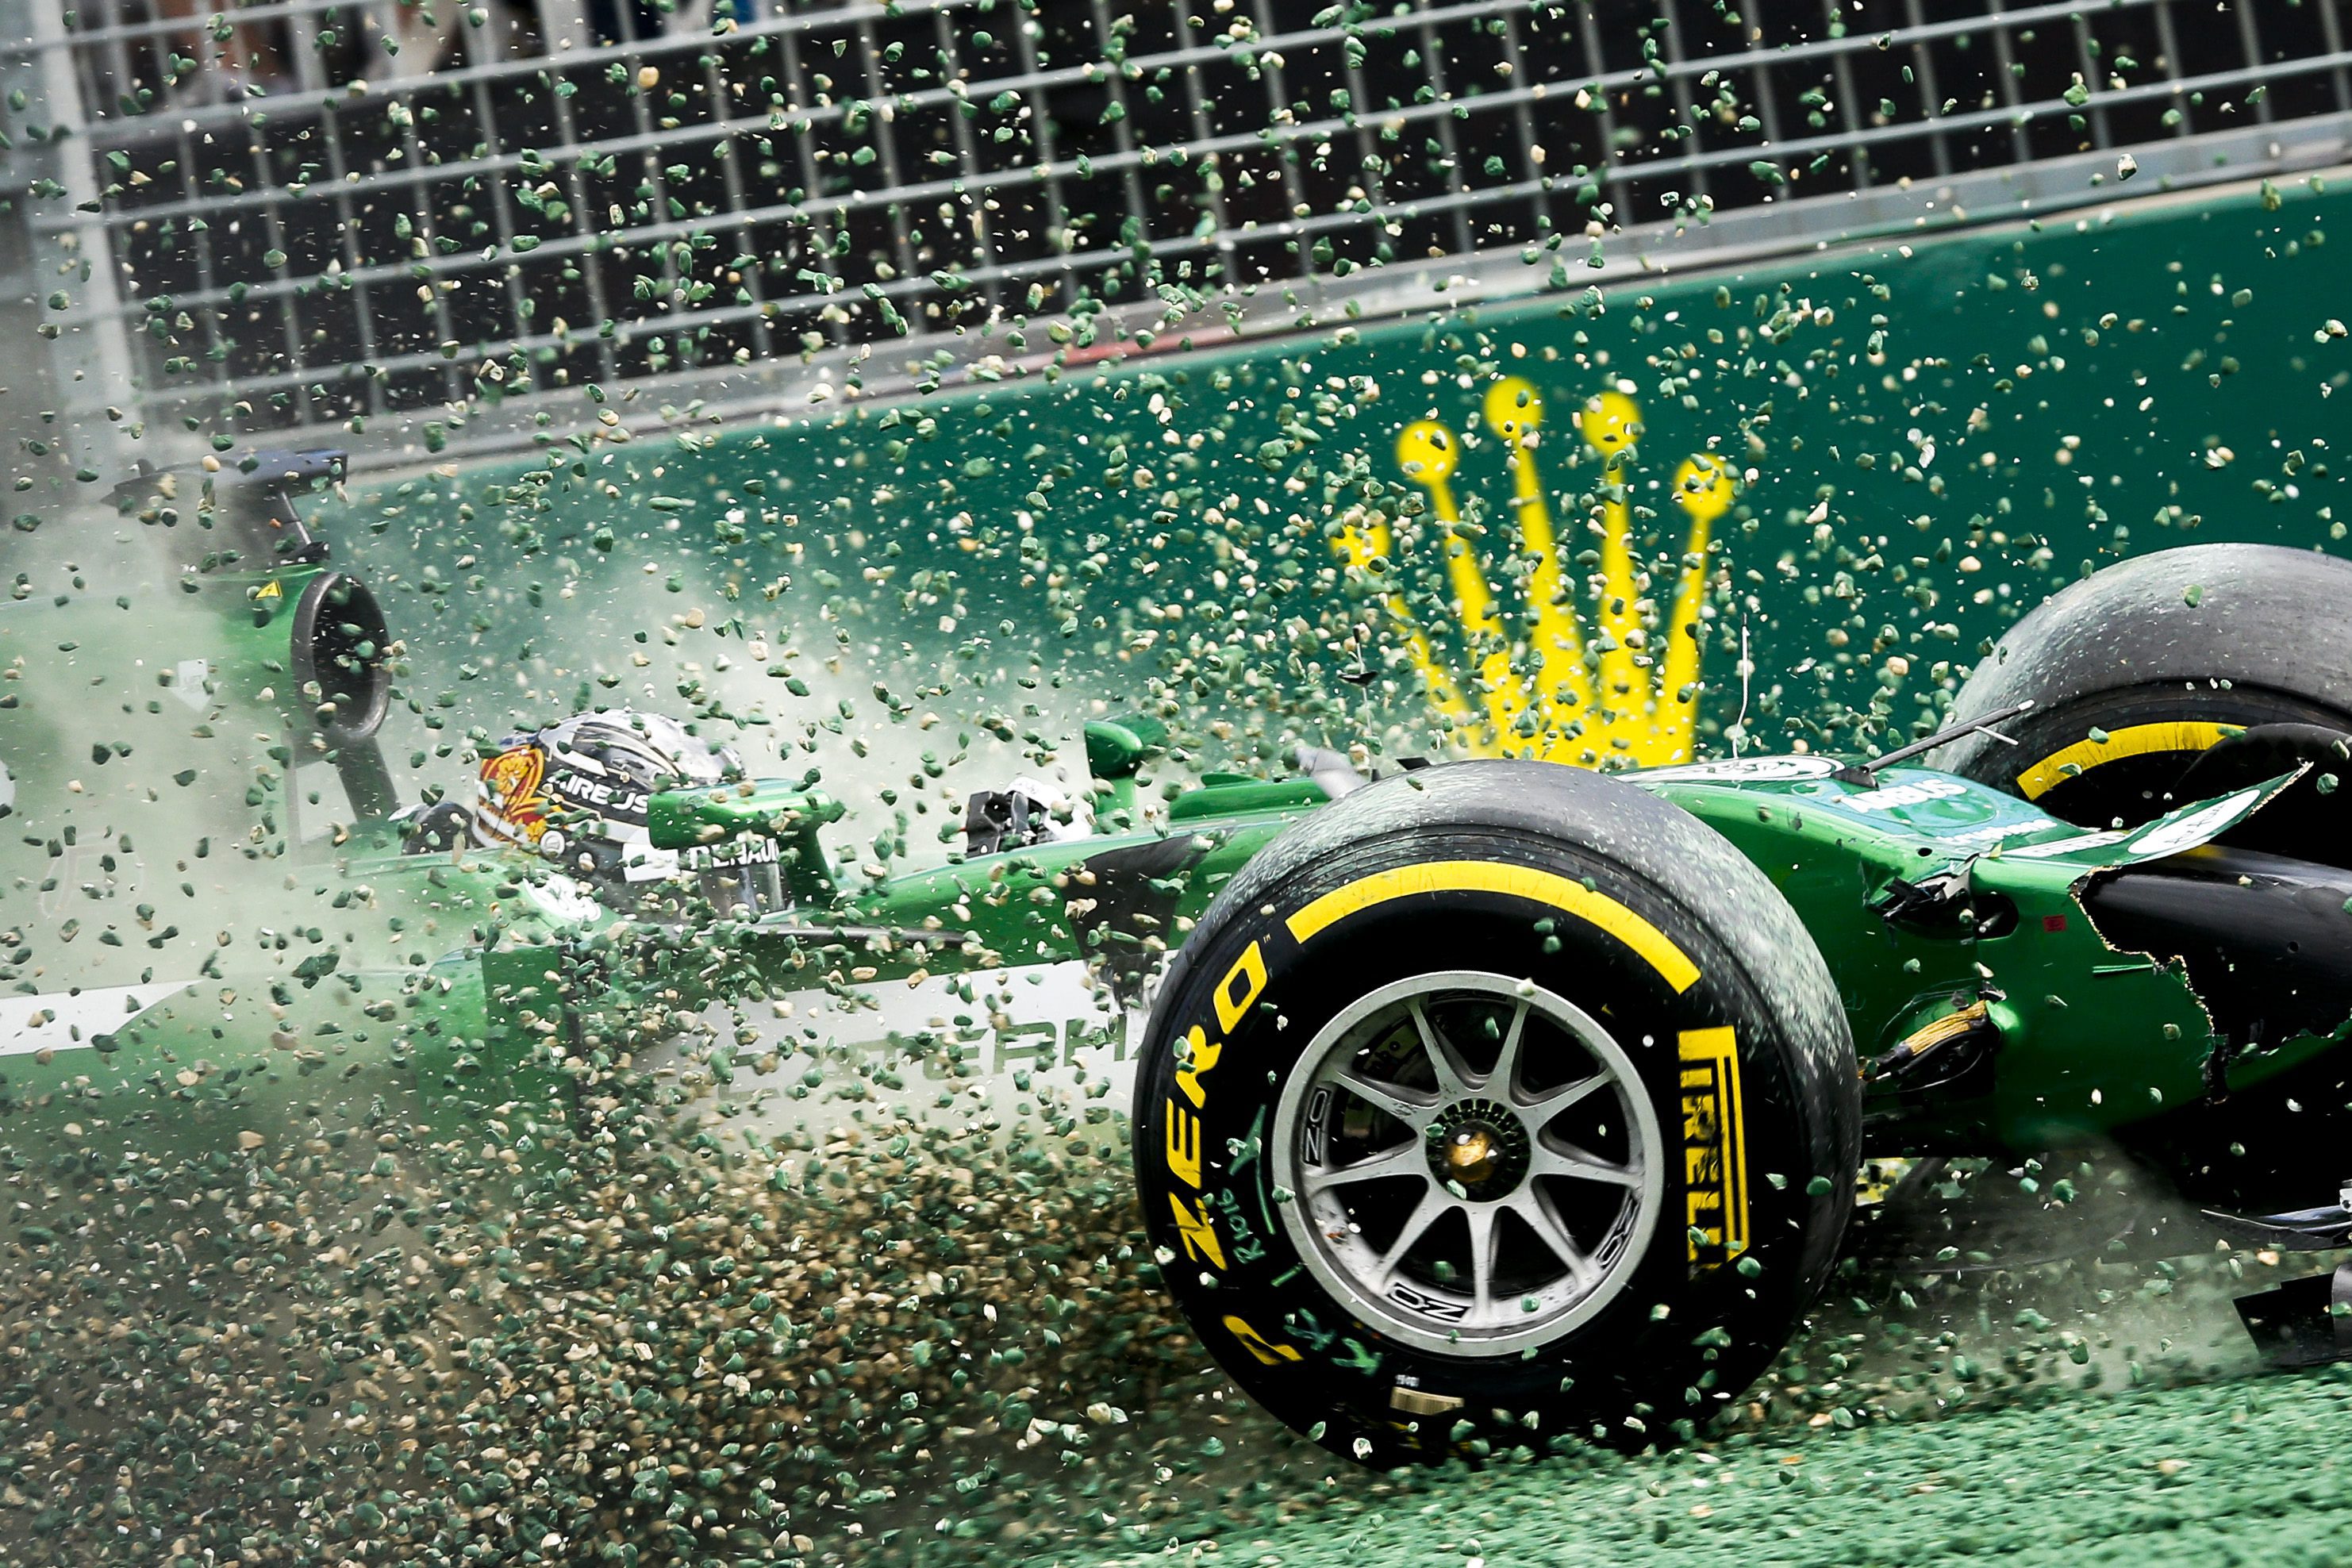 Japan's Kamui Kobayashi of the Caterham team hits the gravel bed after crashing in the Australian Grand Prix in March. It has been all downhill since for Caterham who have gone bust. Photo: EPA